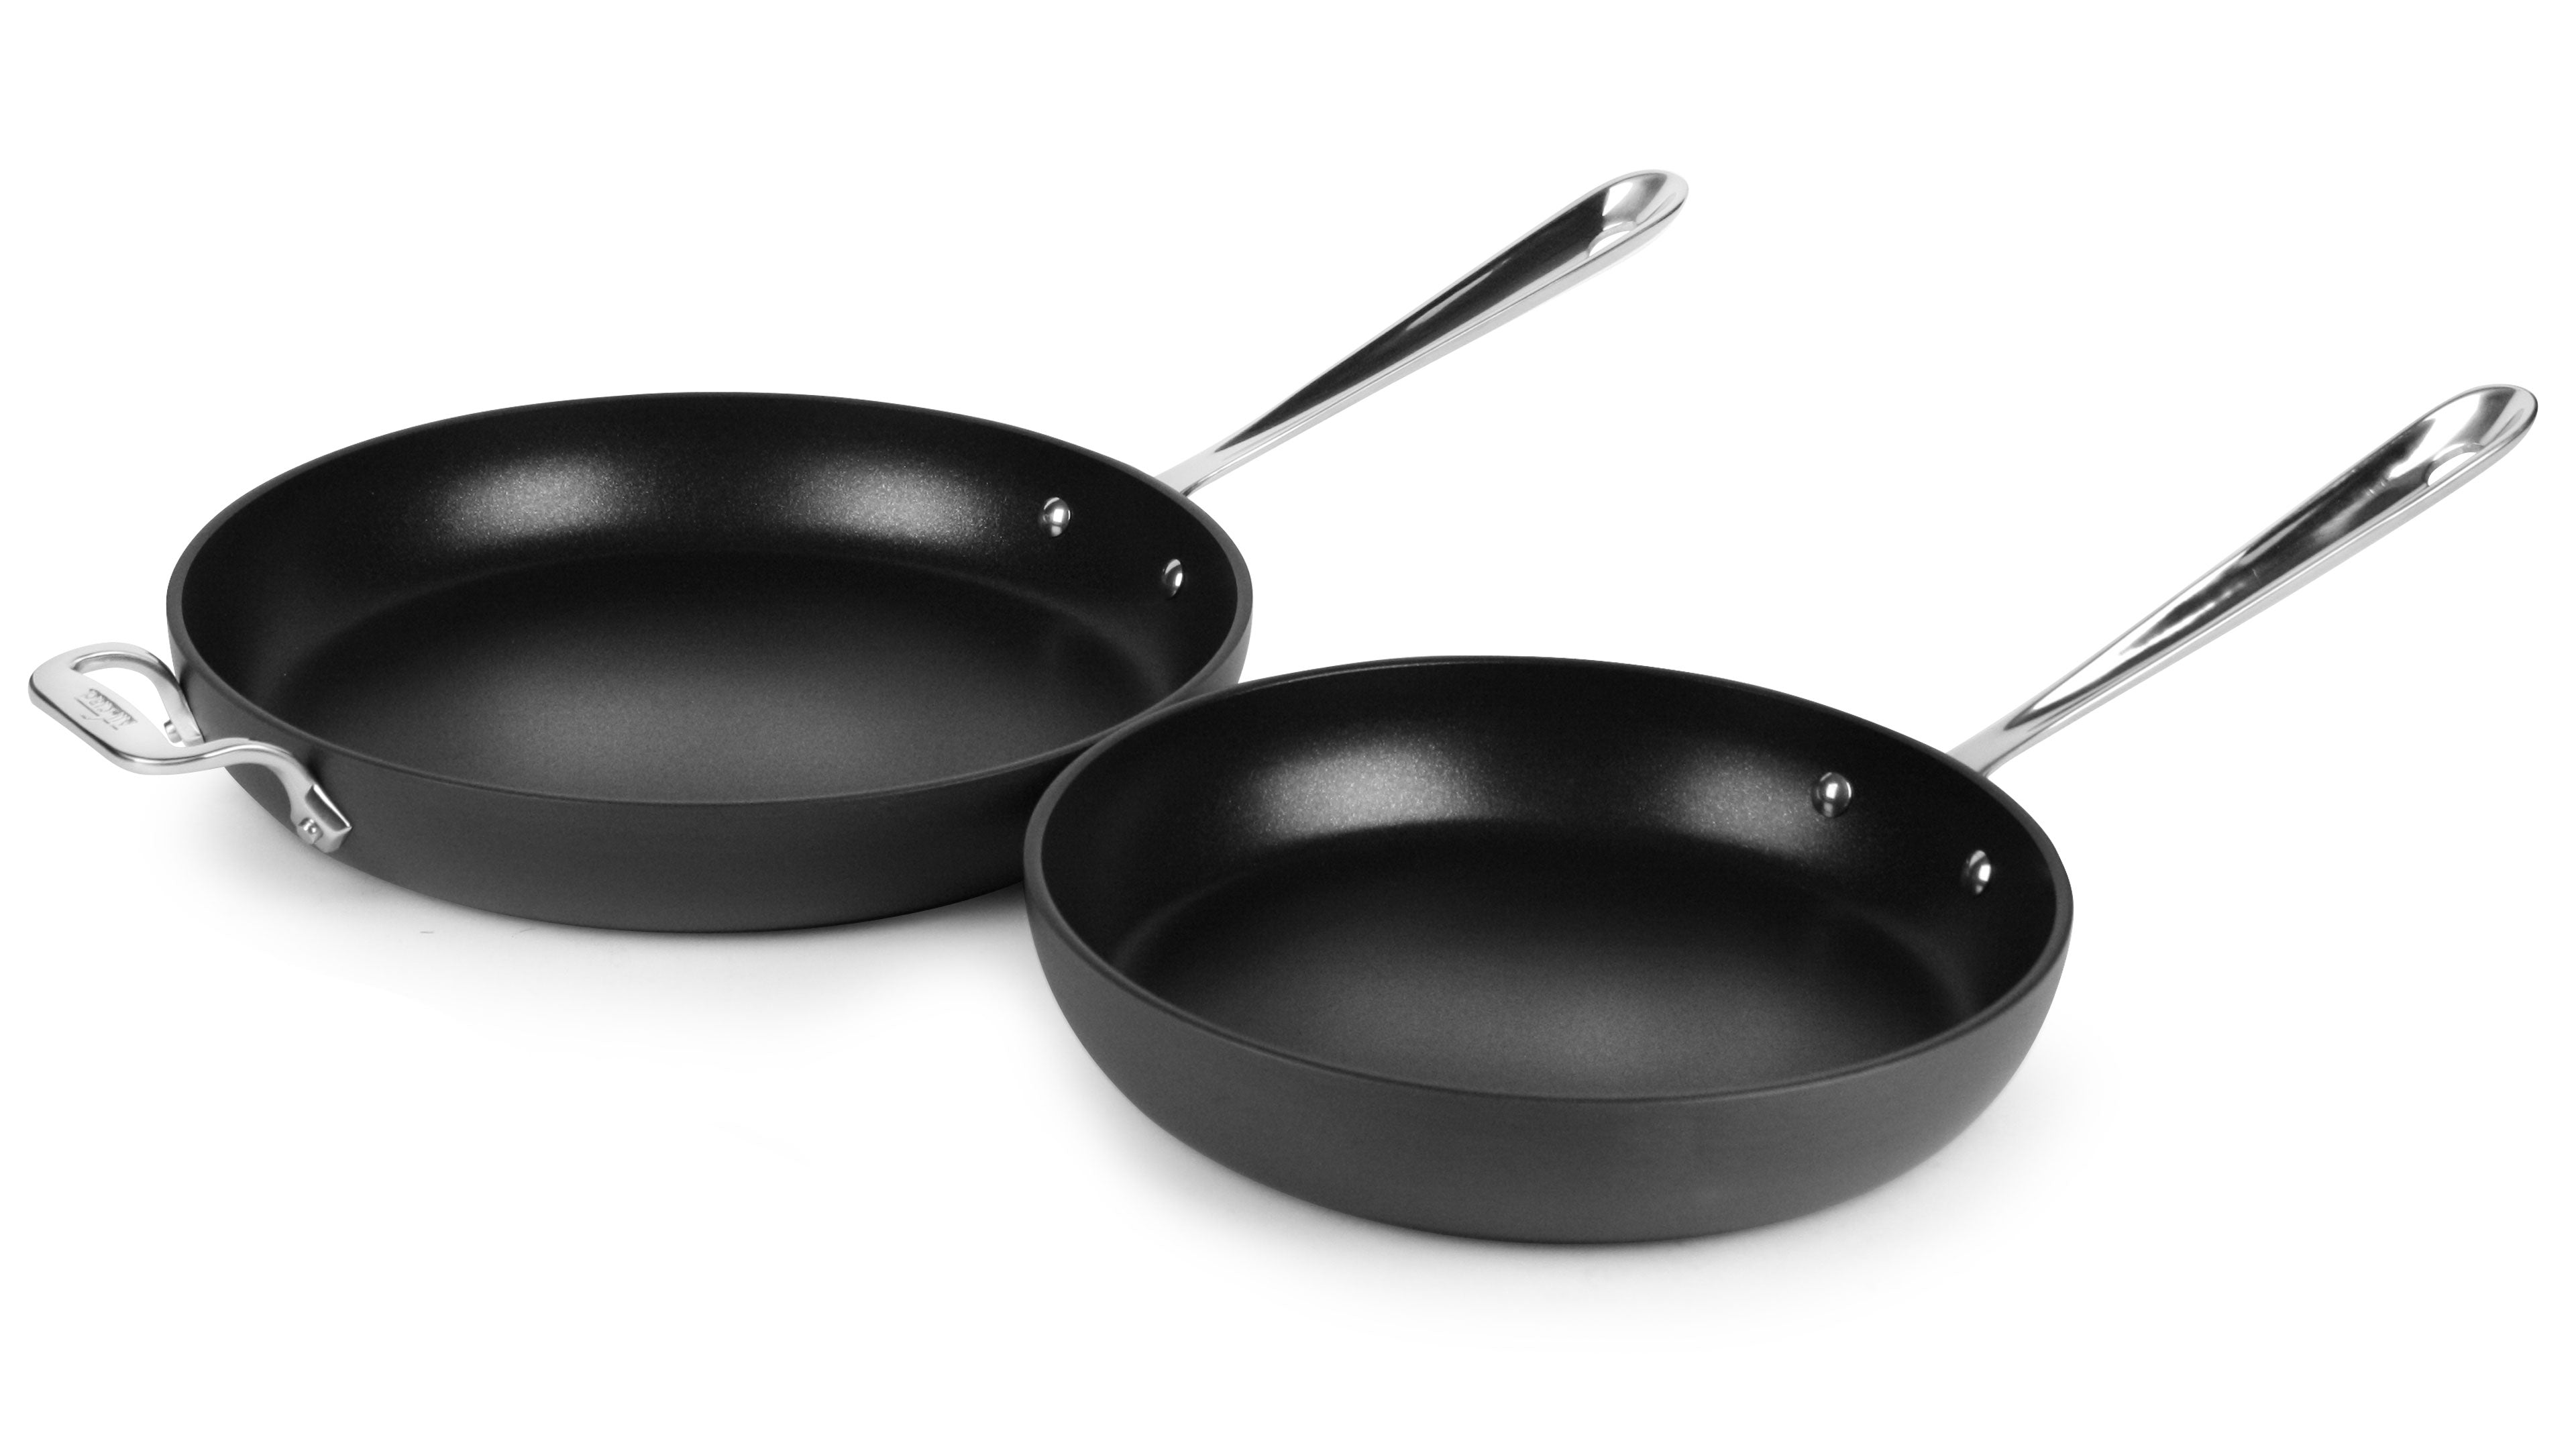 All-Clad HA1 Nonstick Fry Pan Set Review: Great Price